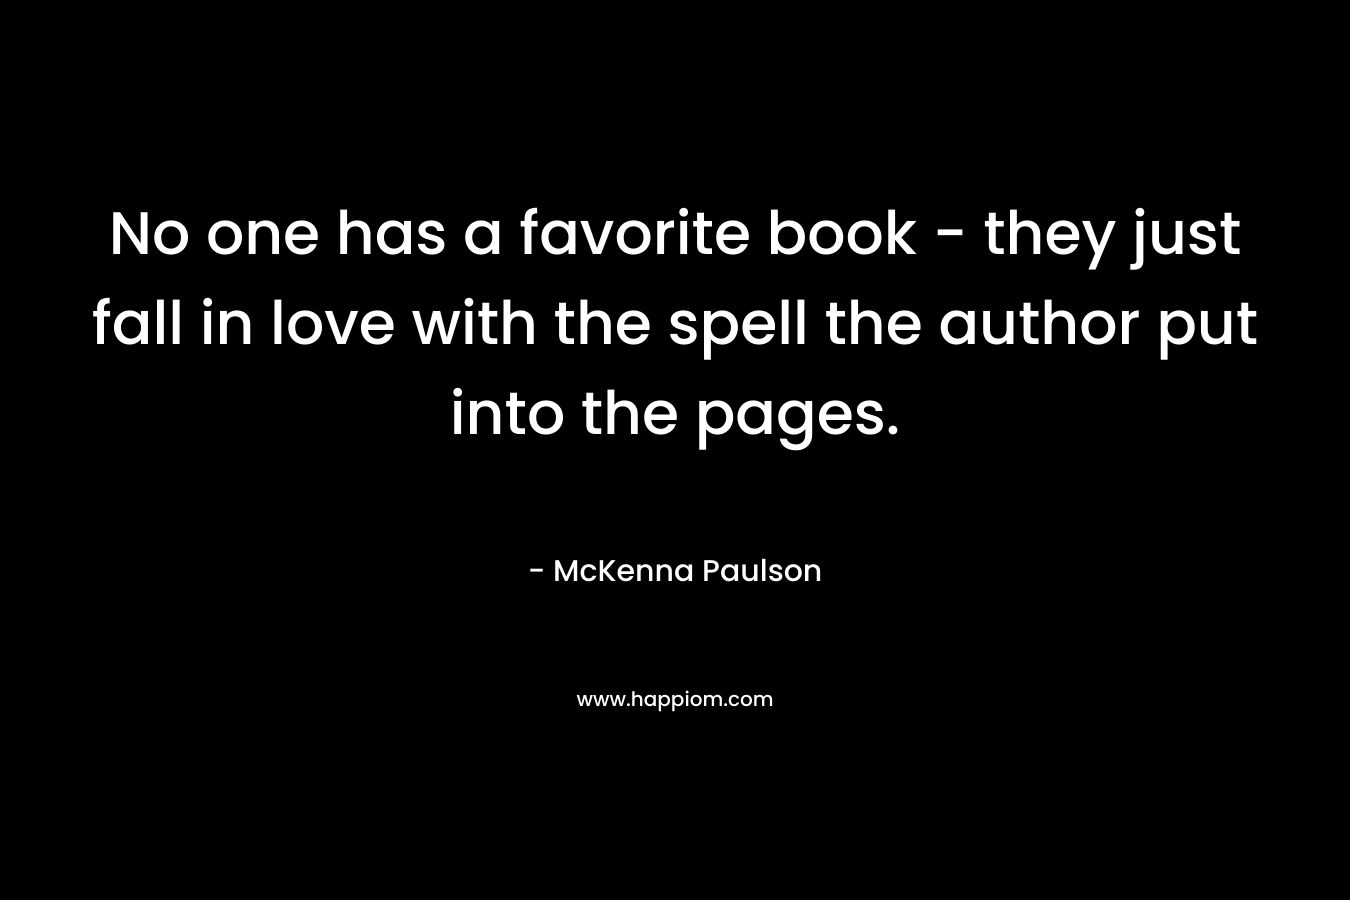 No one has a favorite book - they just fall in love with the spell the author put into the pages.